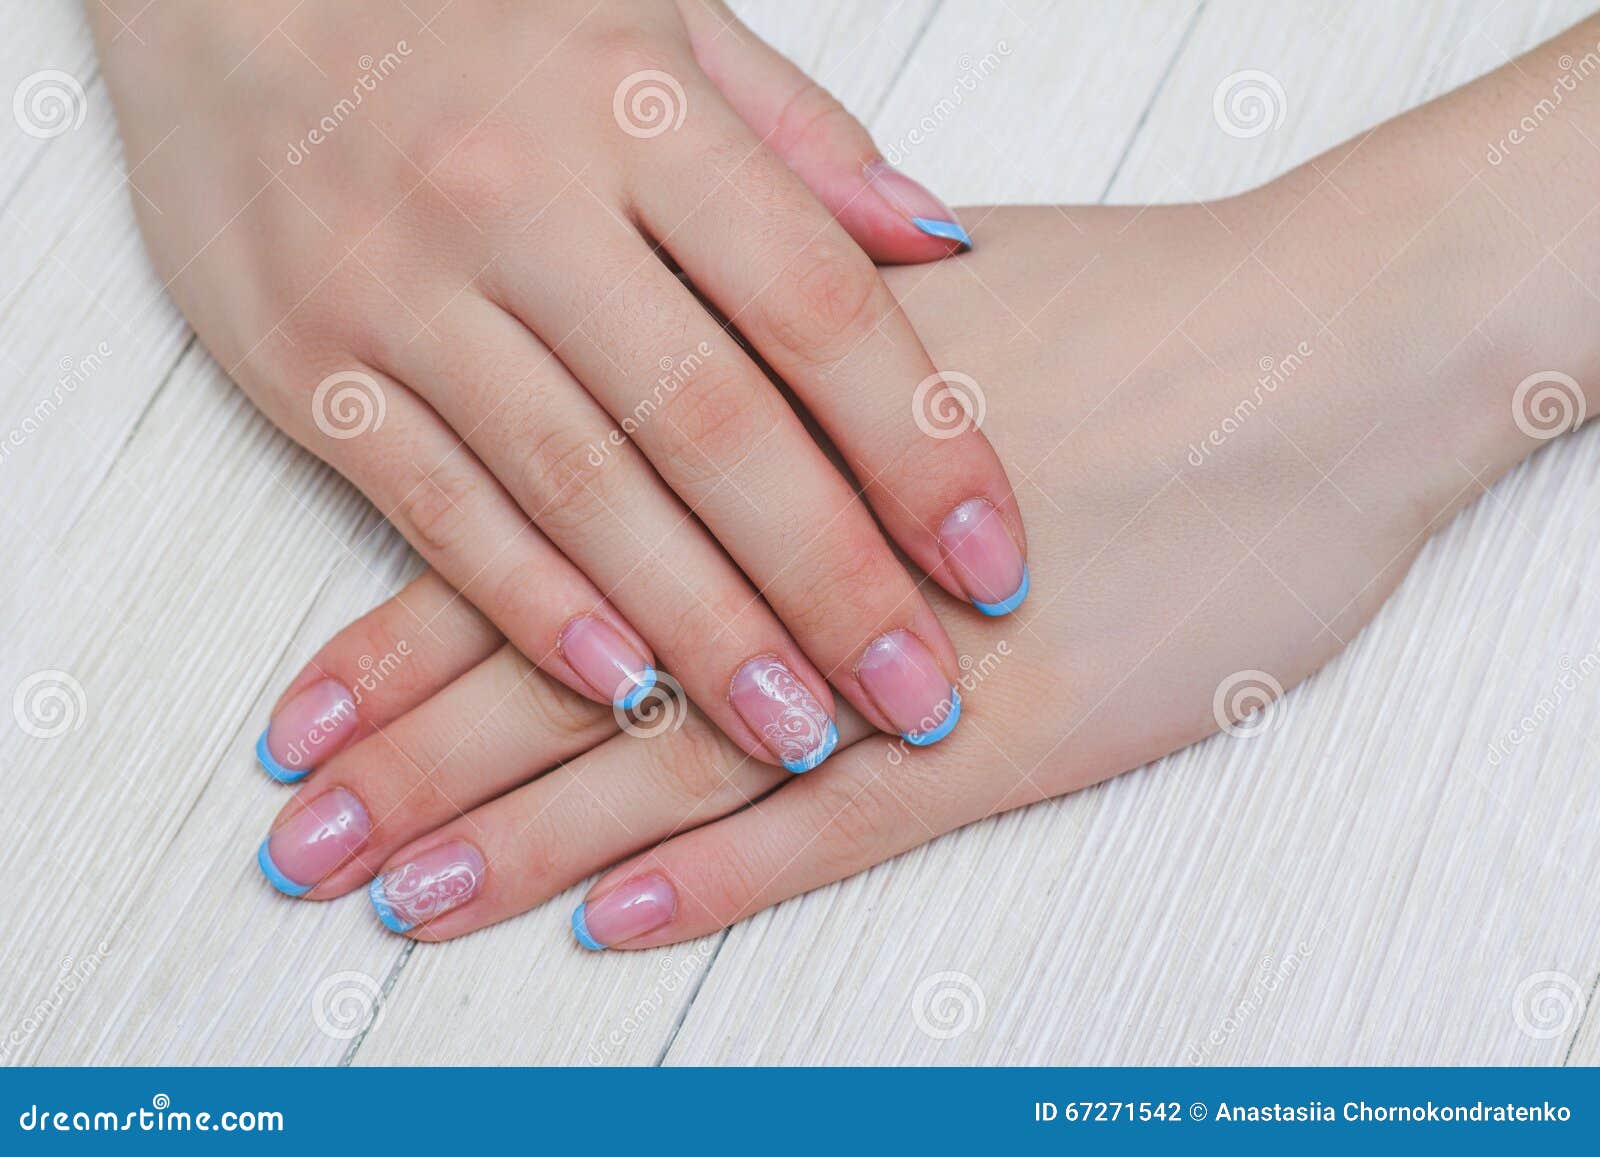 French Nail Art in Light Blue Color Stock Photo - Image of design ...